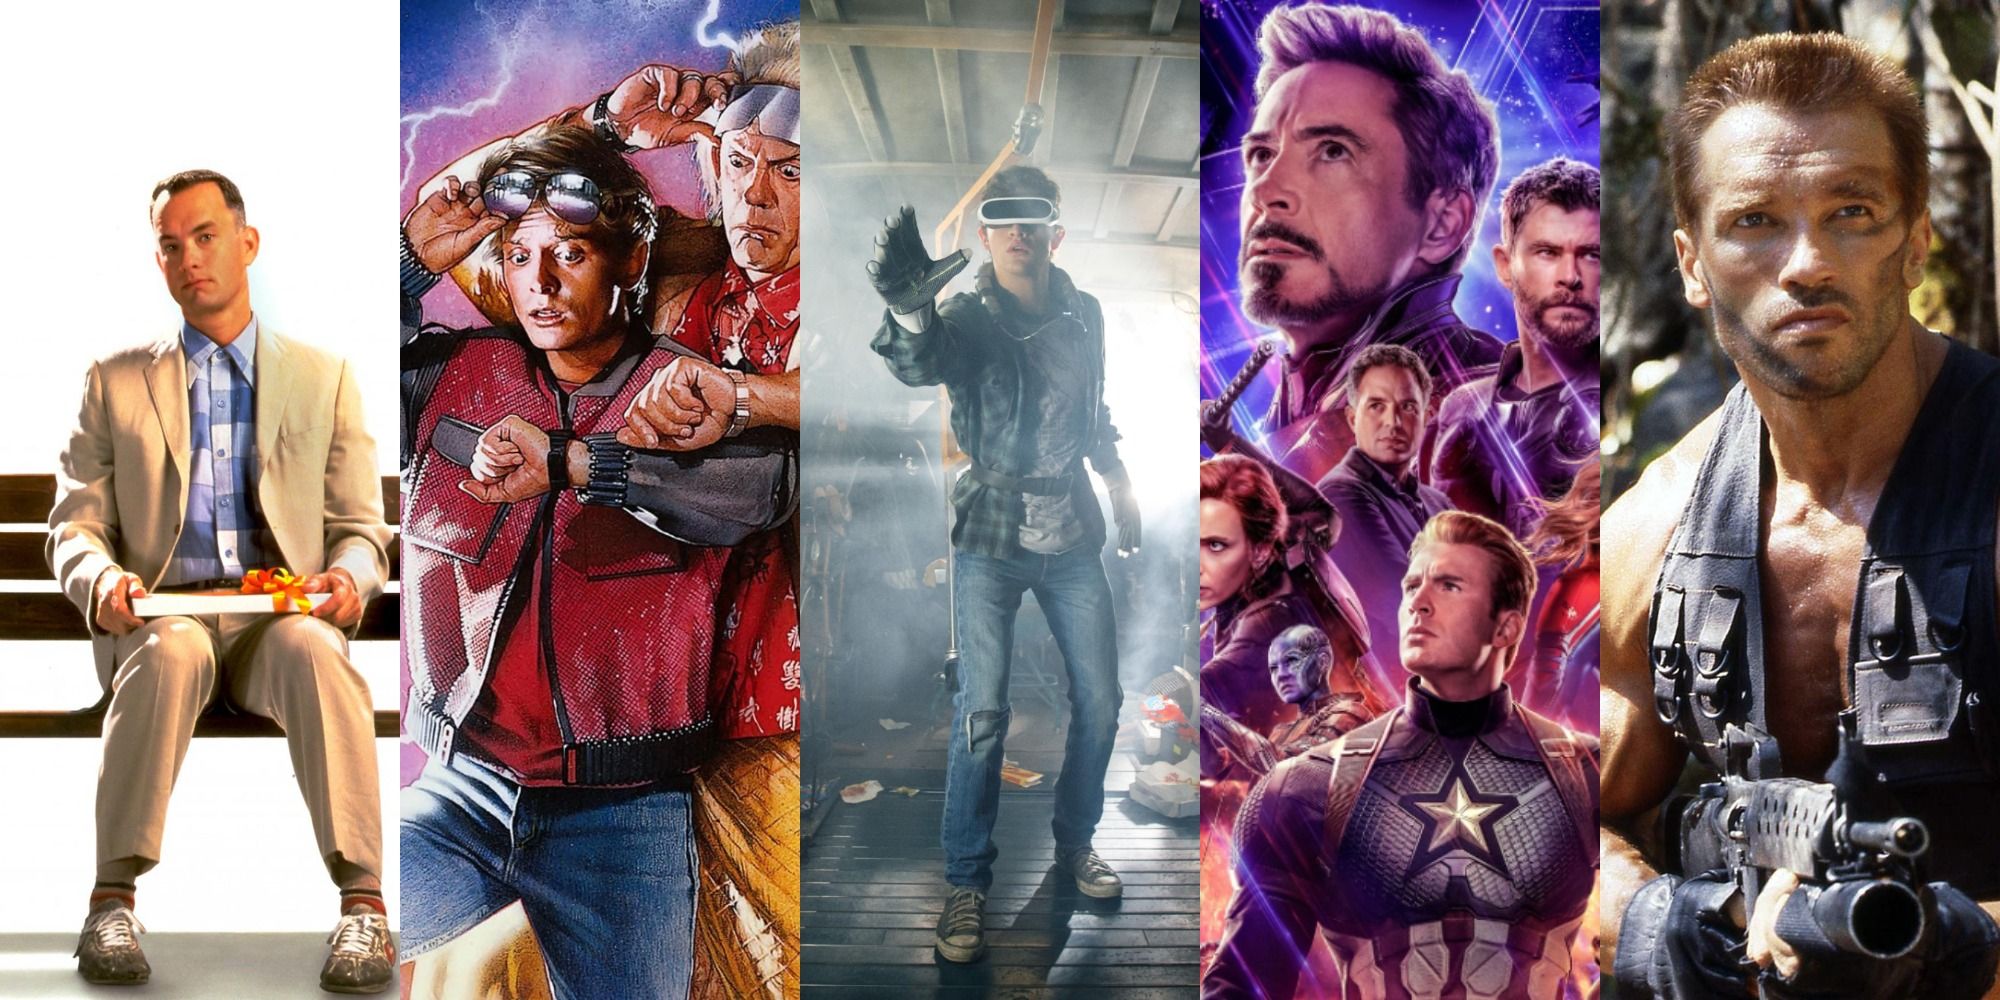 combined images of Avengers Endgame, Predator, Ready Player One, Forrest Gump, Back to the Future